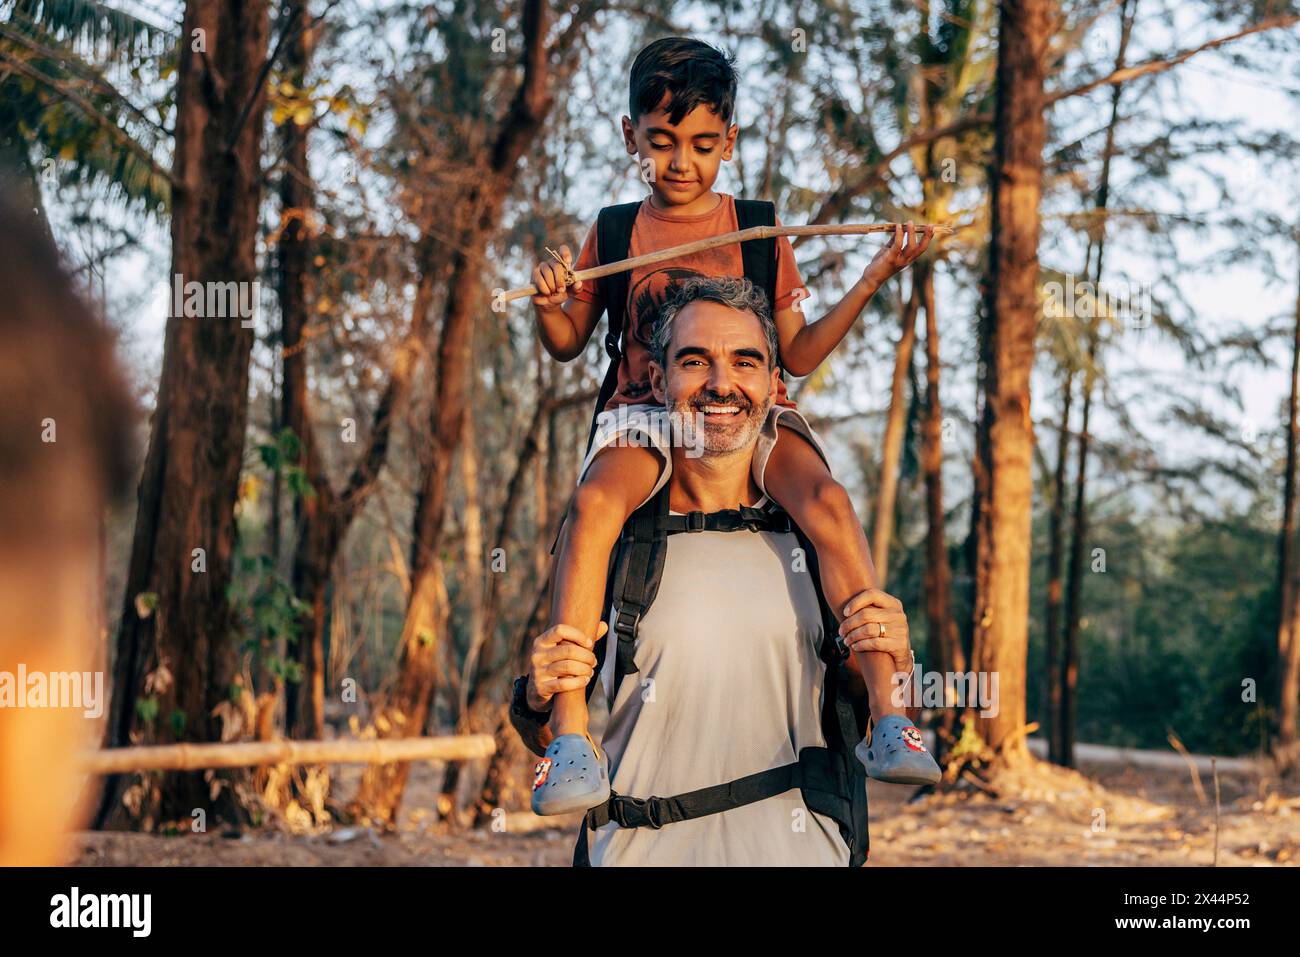 Portrait of happy father carrying son on shoulders in forest Banque D'Images